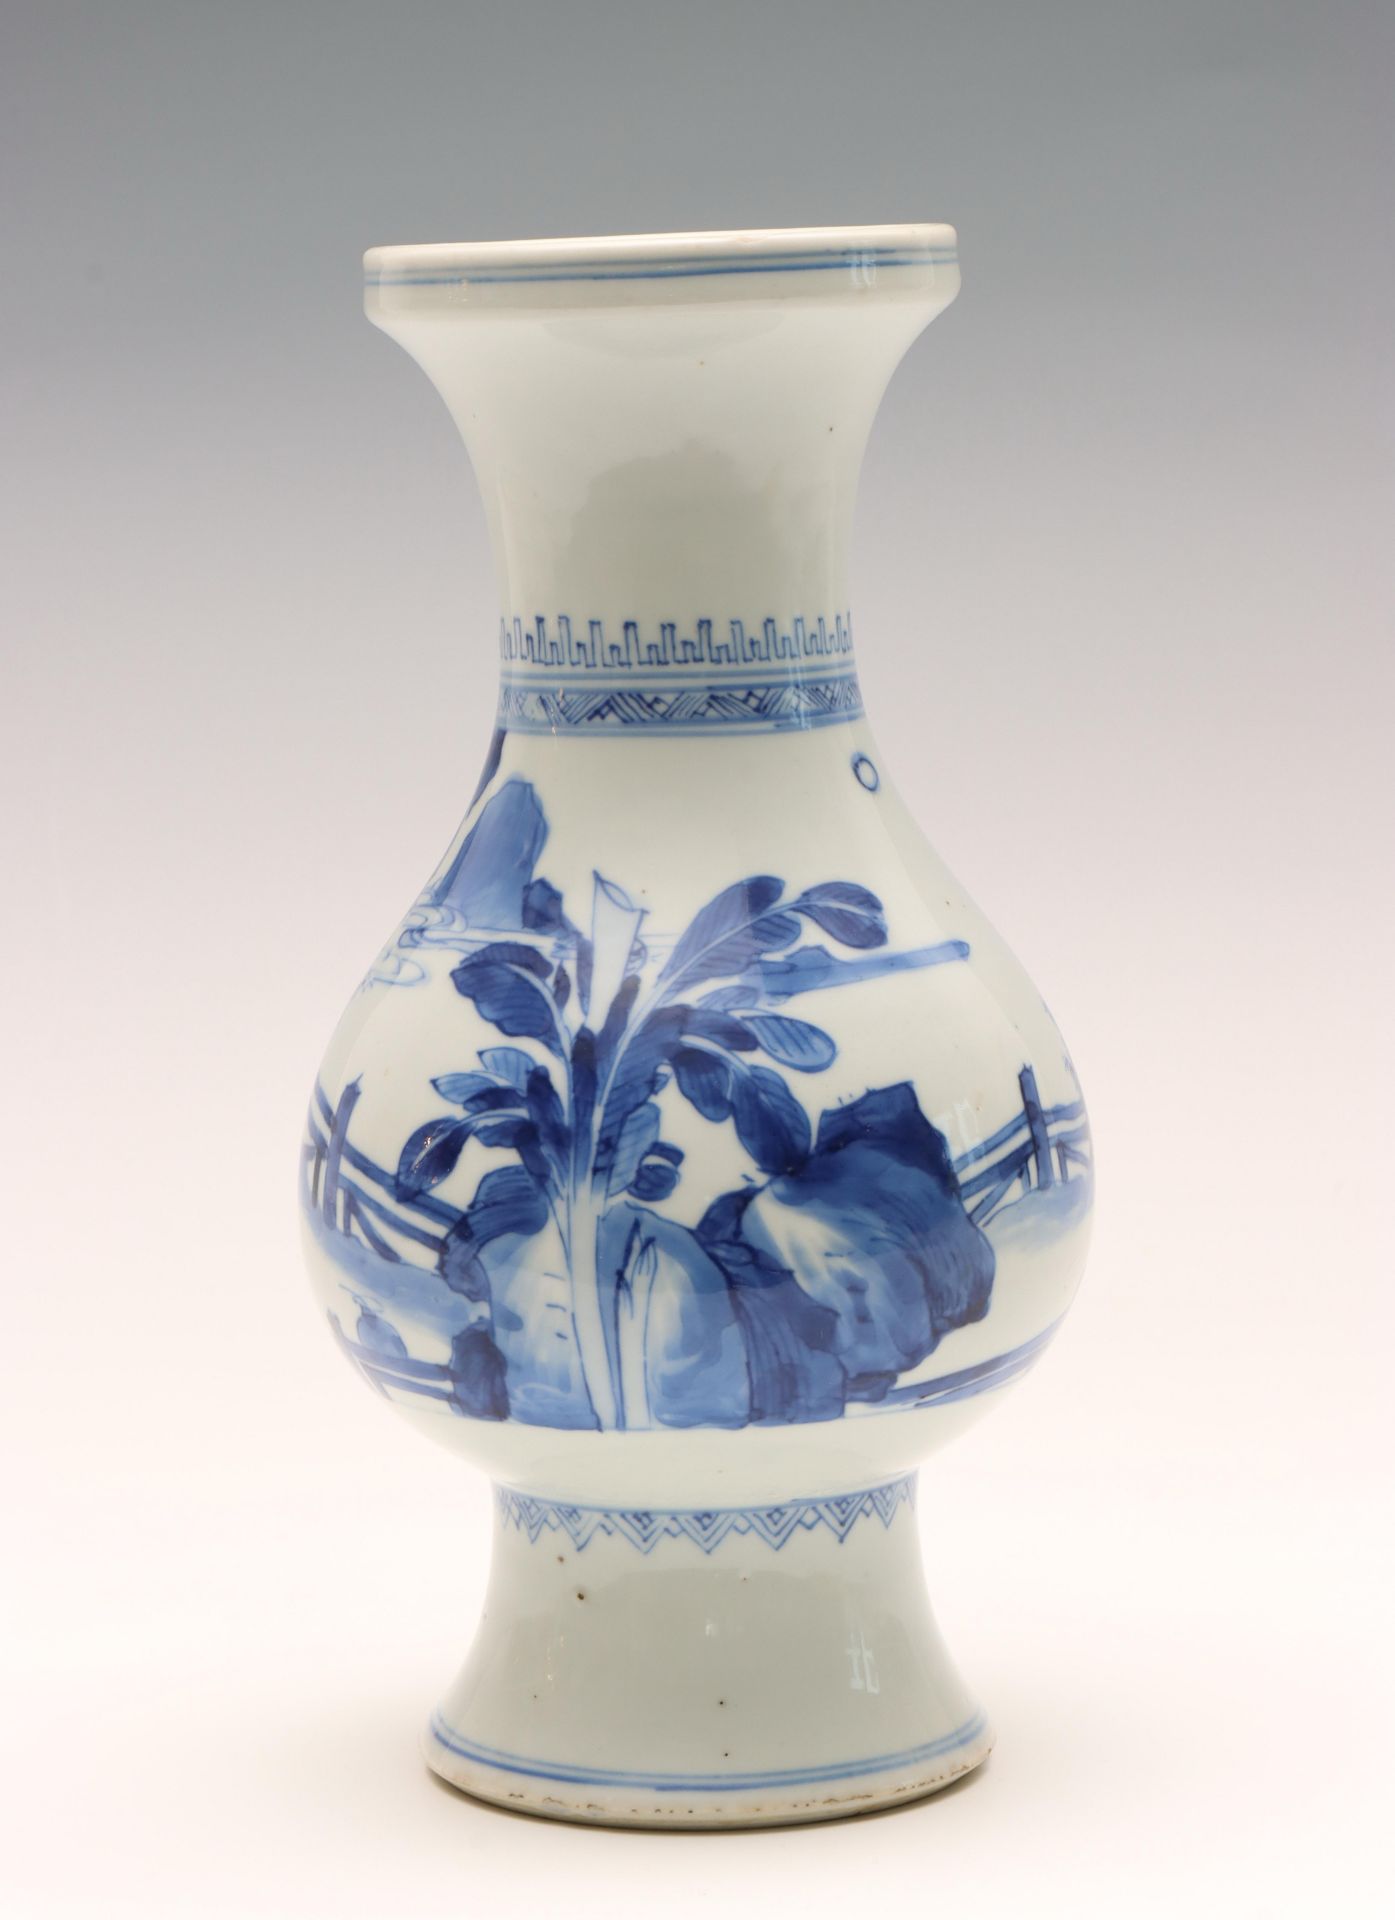 China, blue and white Transitional porcelain 'scholars' vase, mid-17th century, - Image 5 of 16